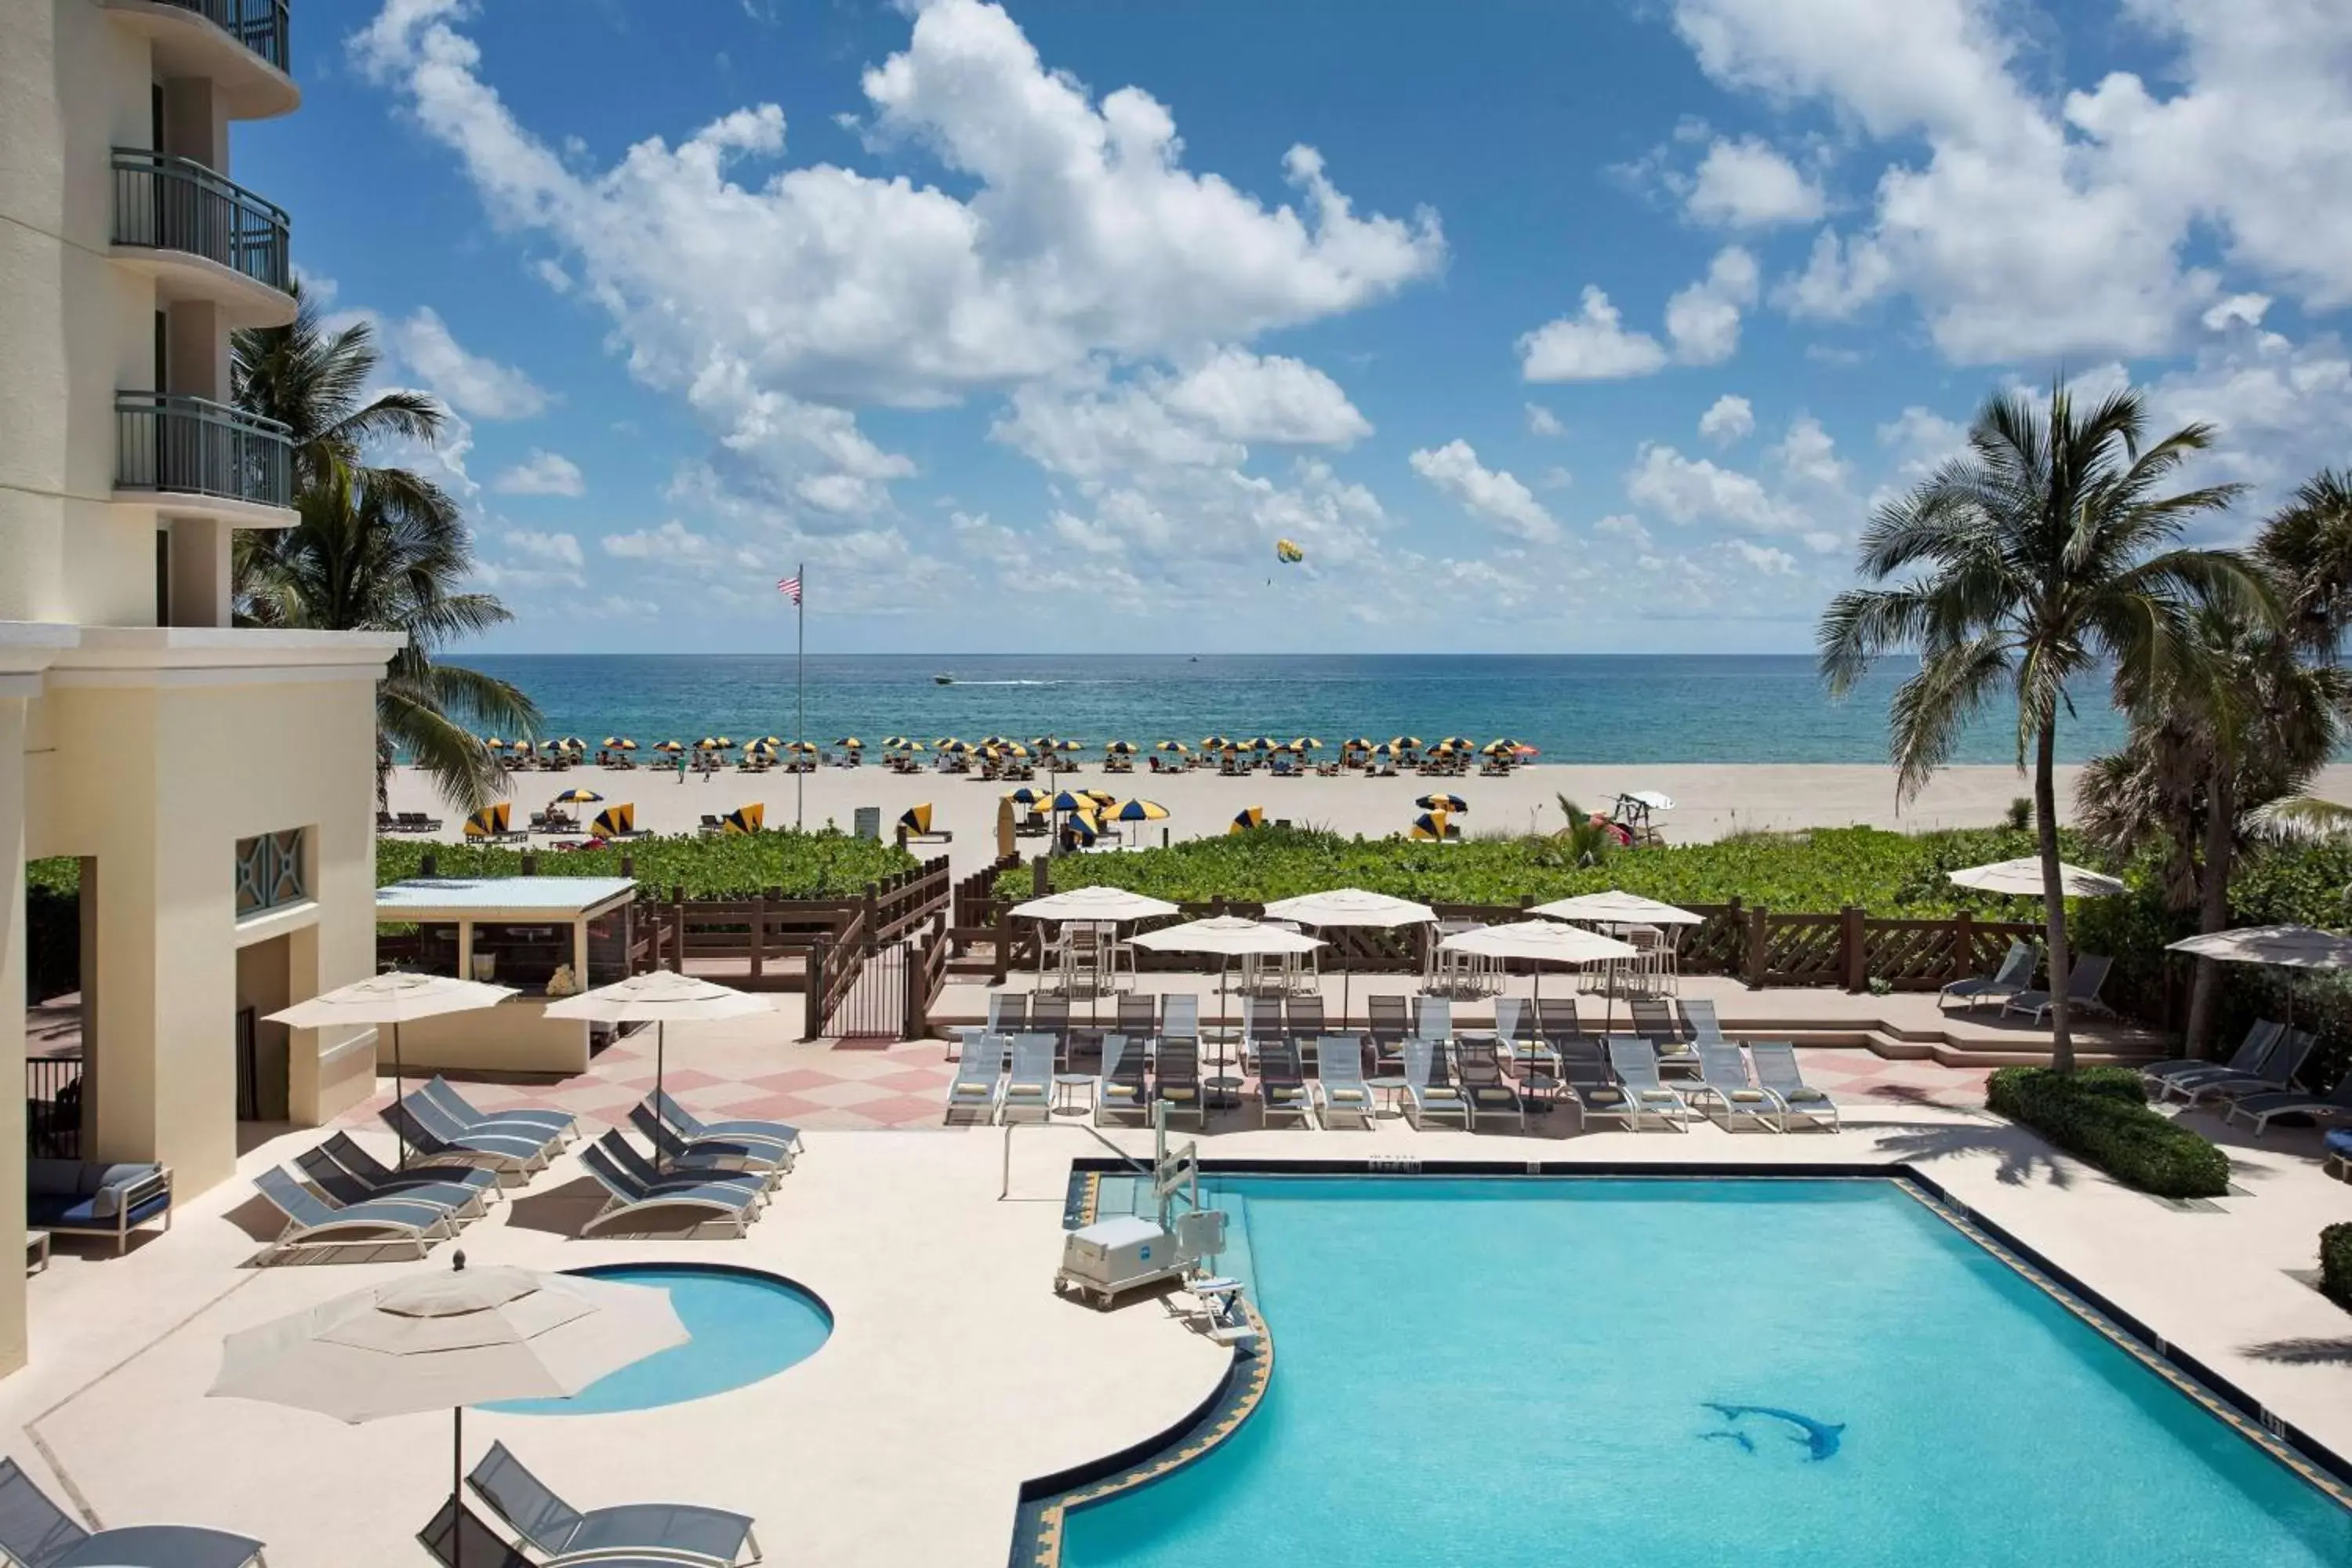 Pool View in Hilton Singer Island Oceanfront Palm Beaches Resort